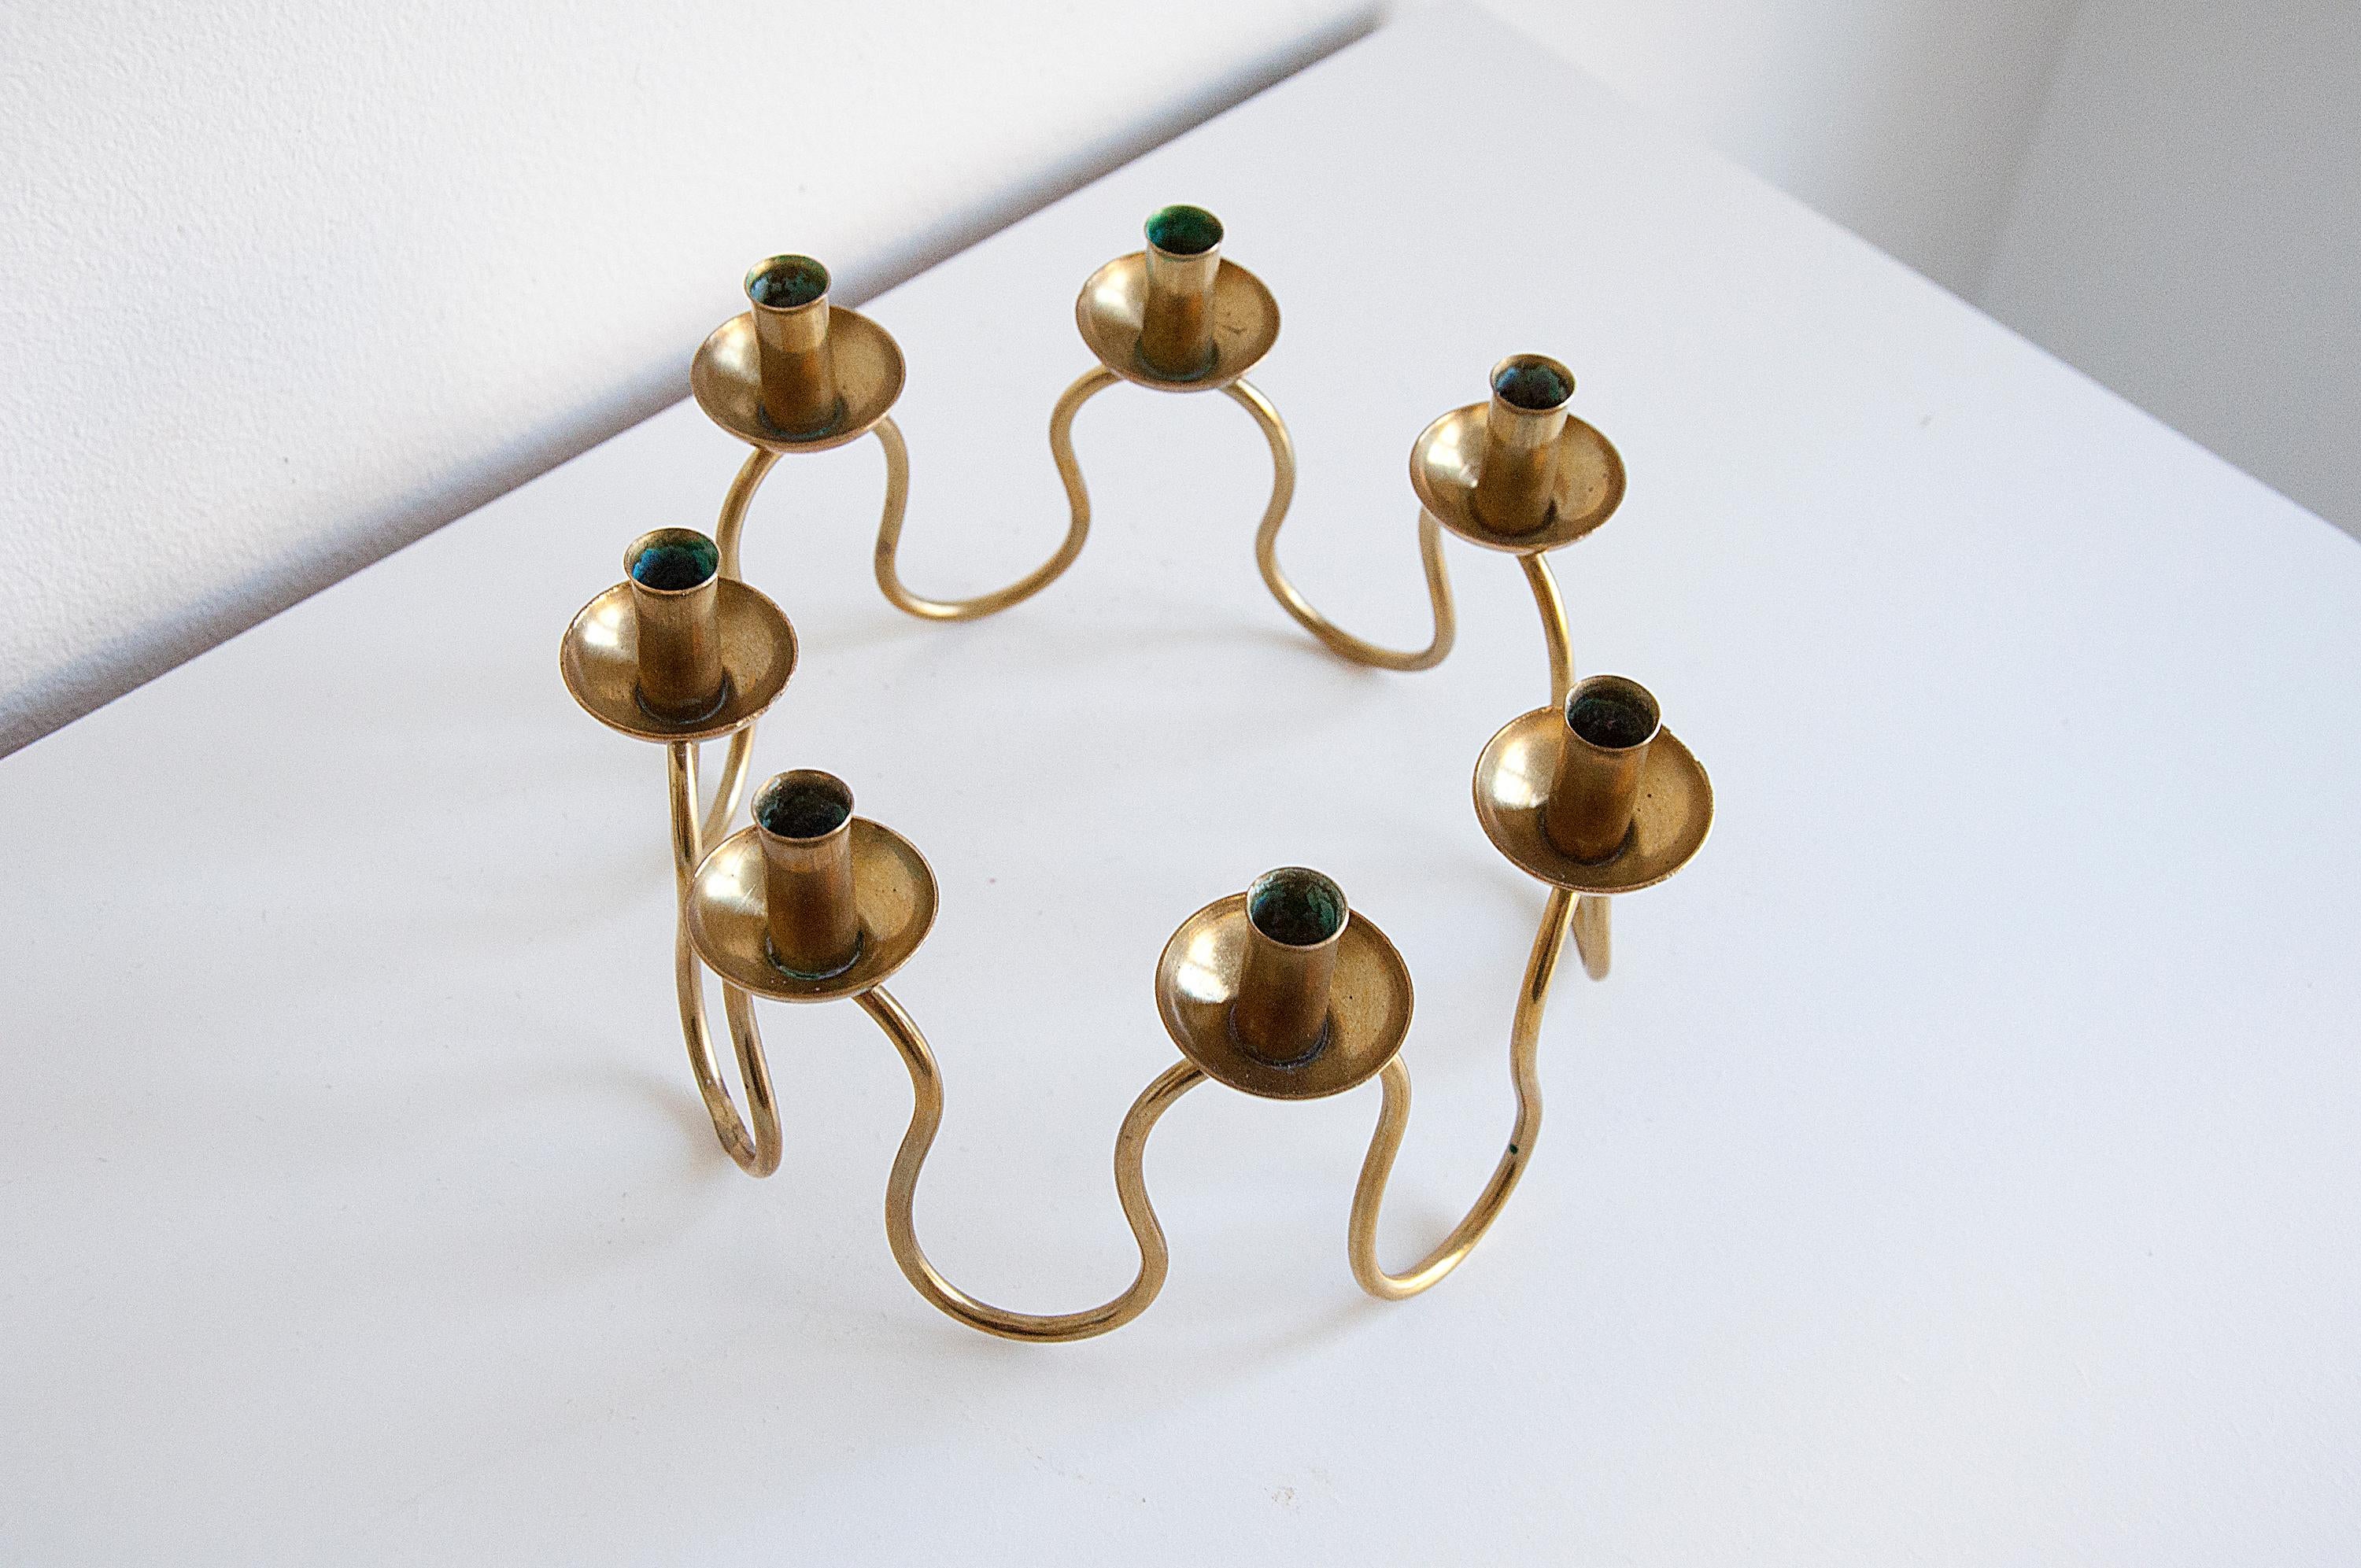 Swedish Modern Candle Holder in Brass by Lars Holmström, 1950s For Sale 1